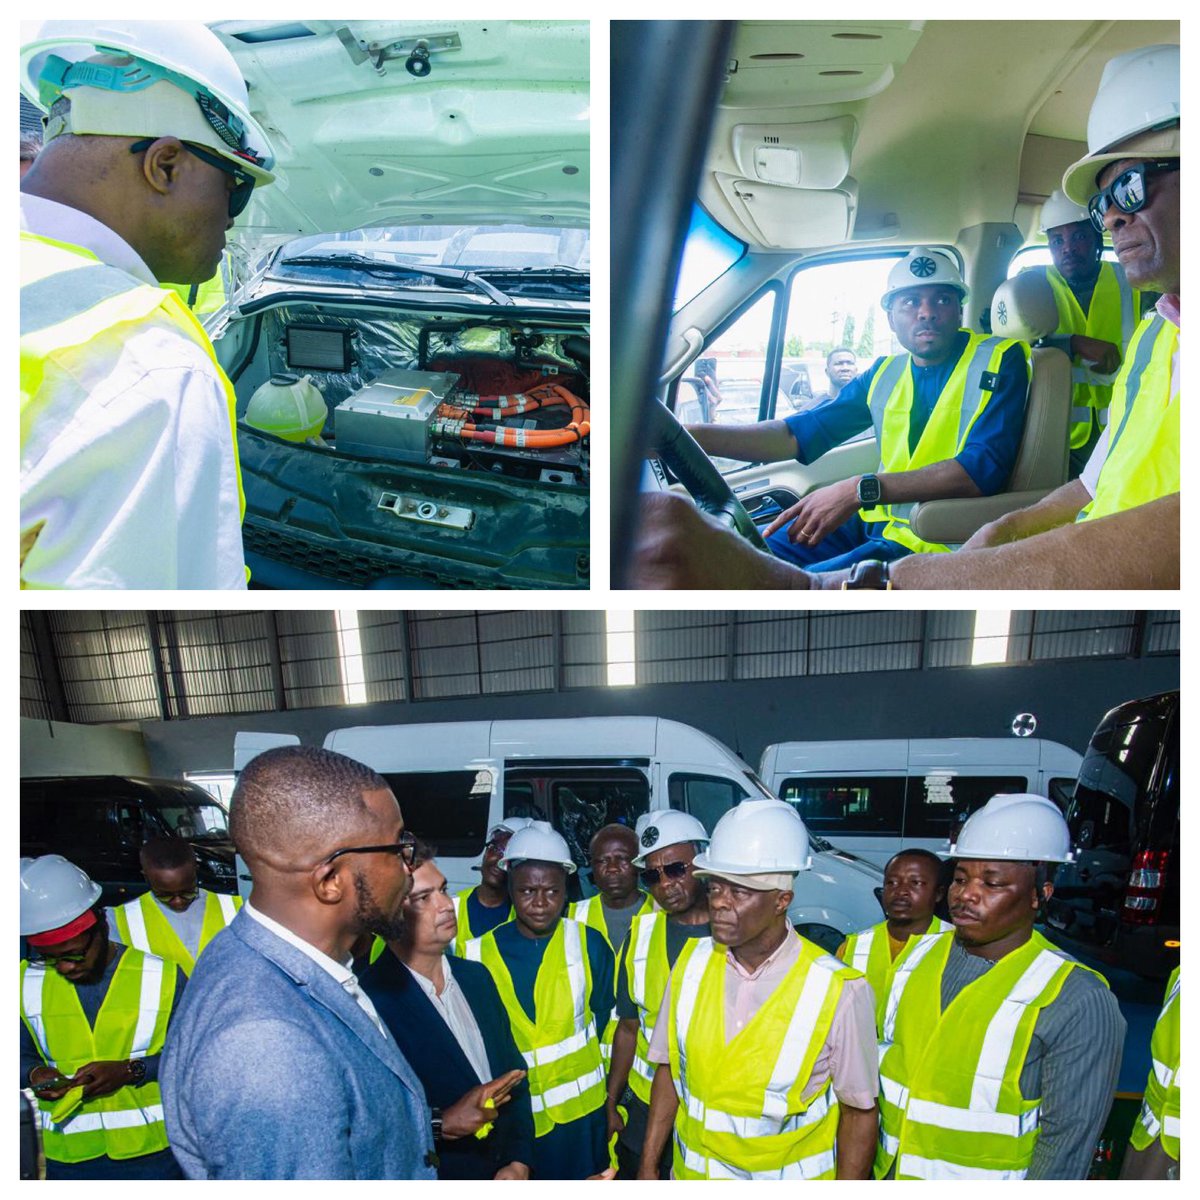 CNG buses update Finance Minister and coordinating Minister of the Economy, Mr Olawale Edun, has visited the JET Motor Company (JET) Assembly Plant in Lagos, where Compressed Natural Gas (CNG) buses are being assembled under the Presidential CNG Initiative. JET, which is…